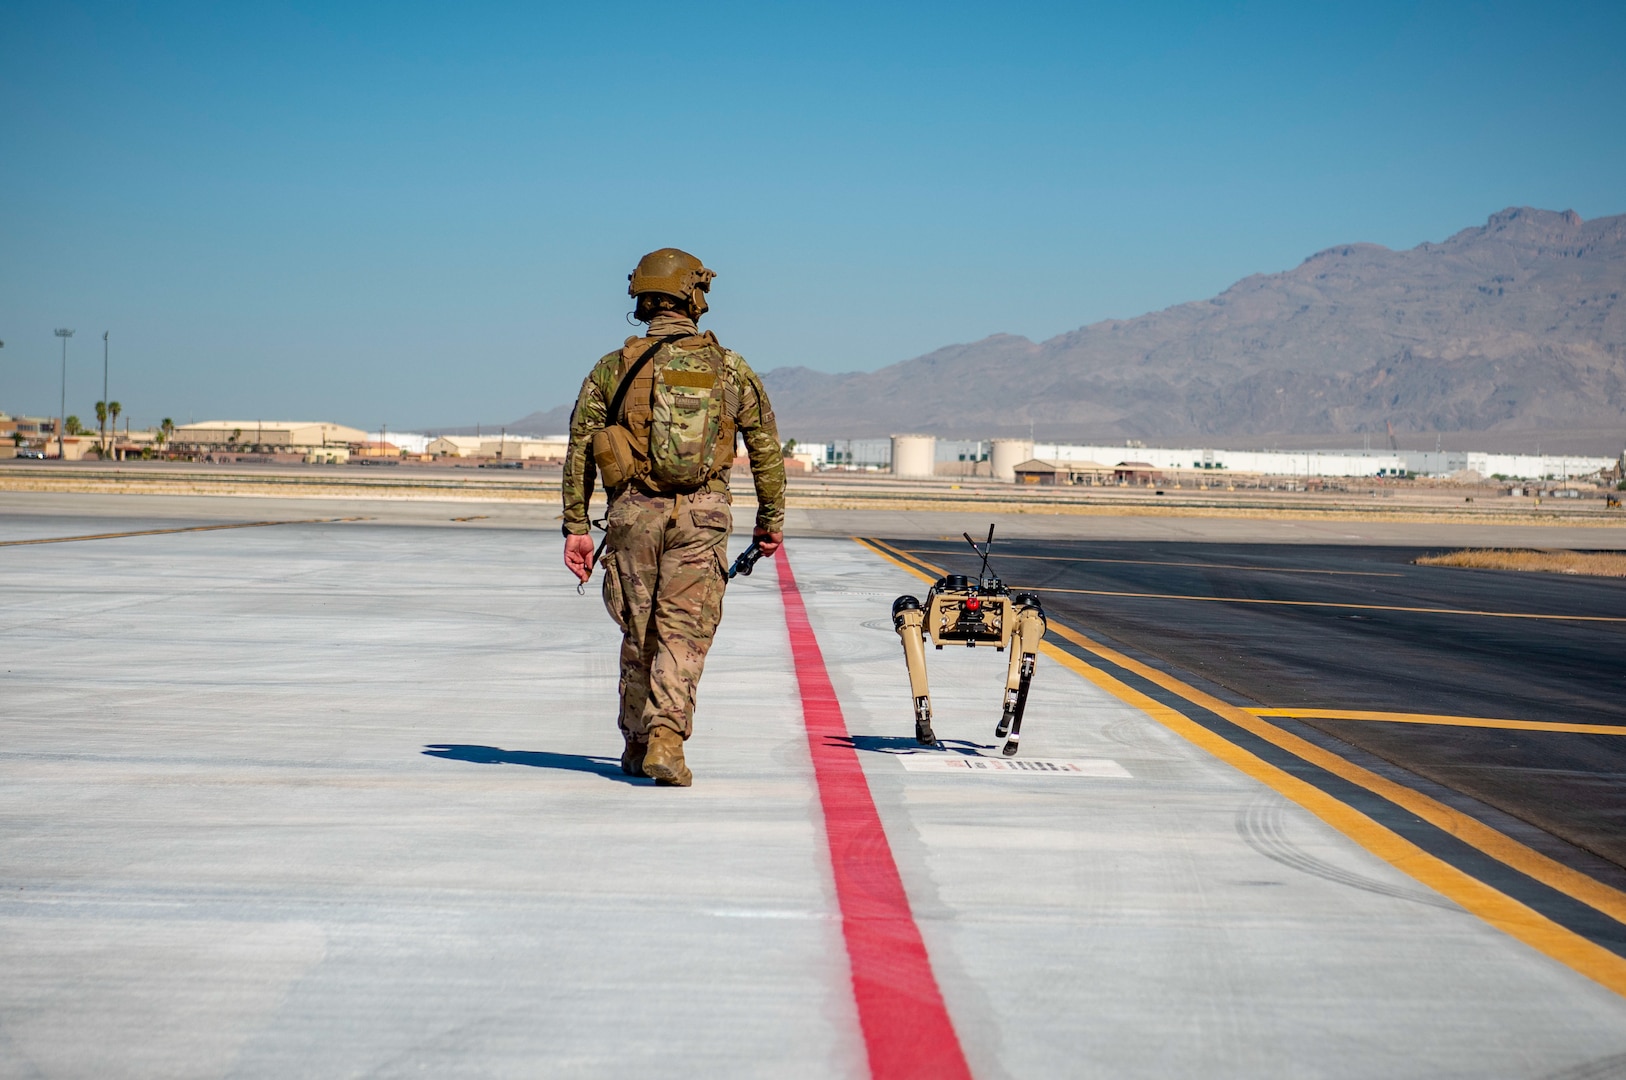 Airman with 321st Contingency Response Squadron security team patrols with Ghost Robotics Vision 60 prototype at simulated austere base during Advanced Battle Management System exercise on Nellis Air Force Base, Nevada, September 3, 2020 (U.S. Air Force/Zachary Rufus)